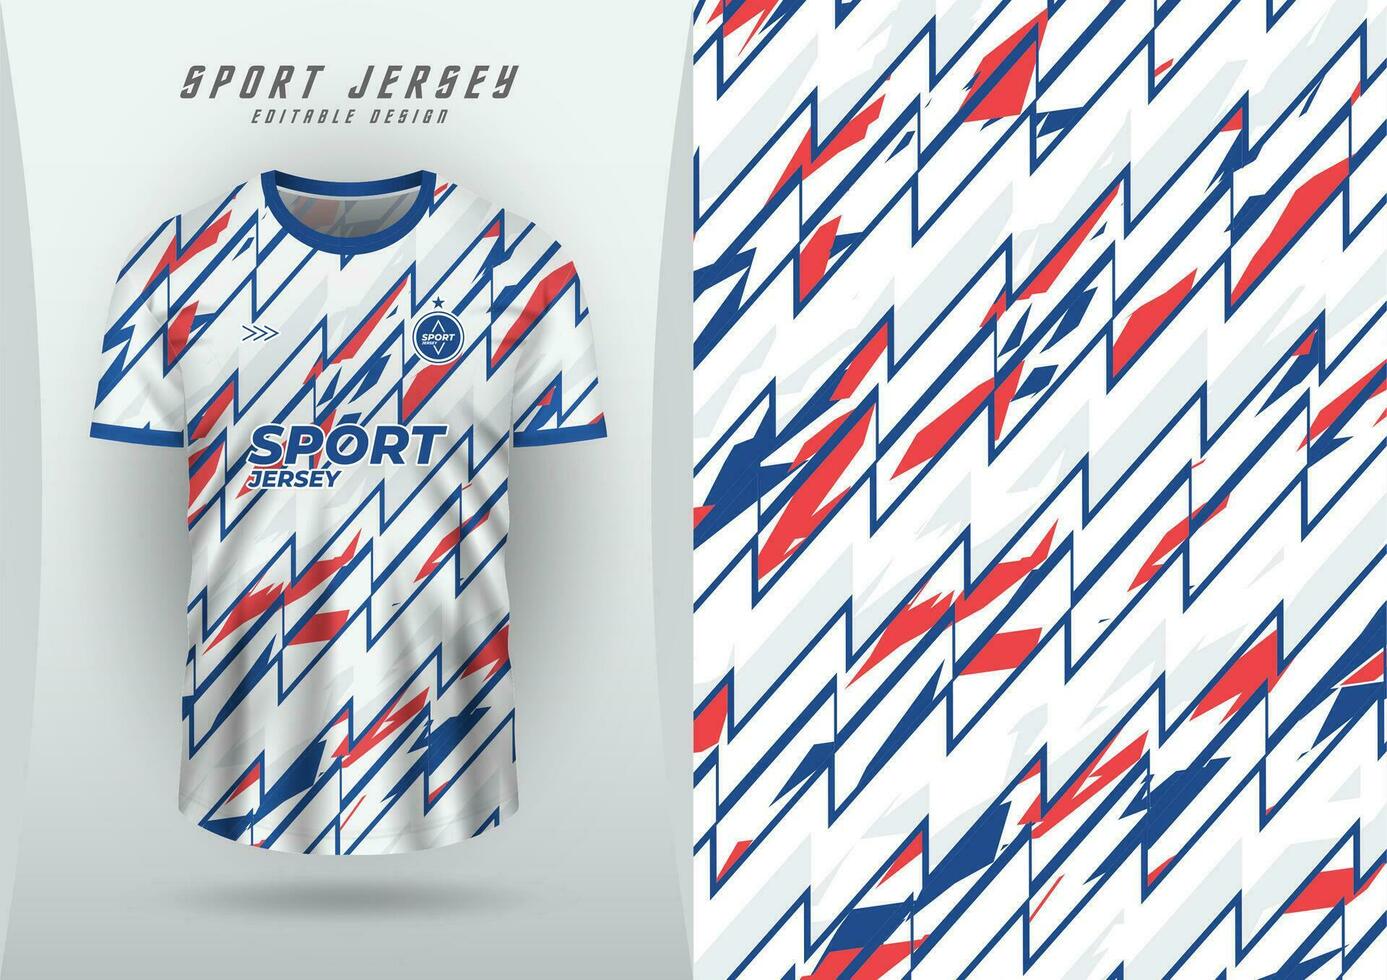 Background for sports jersey, soccer jersey, running jersey, racing jersey, zigzag pattern, white and red blue vector